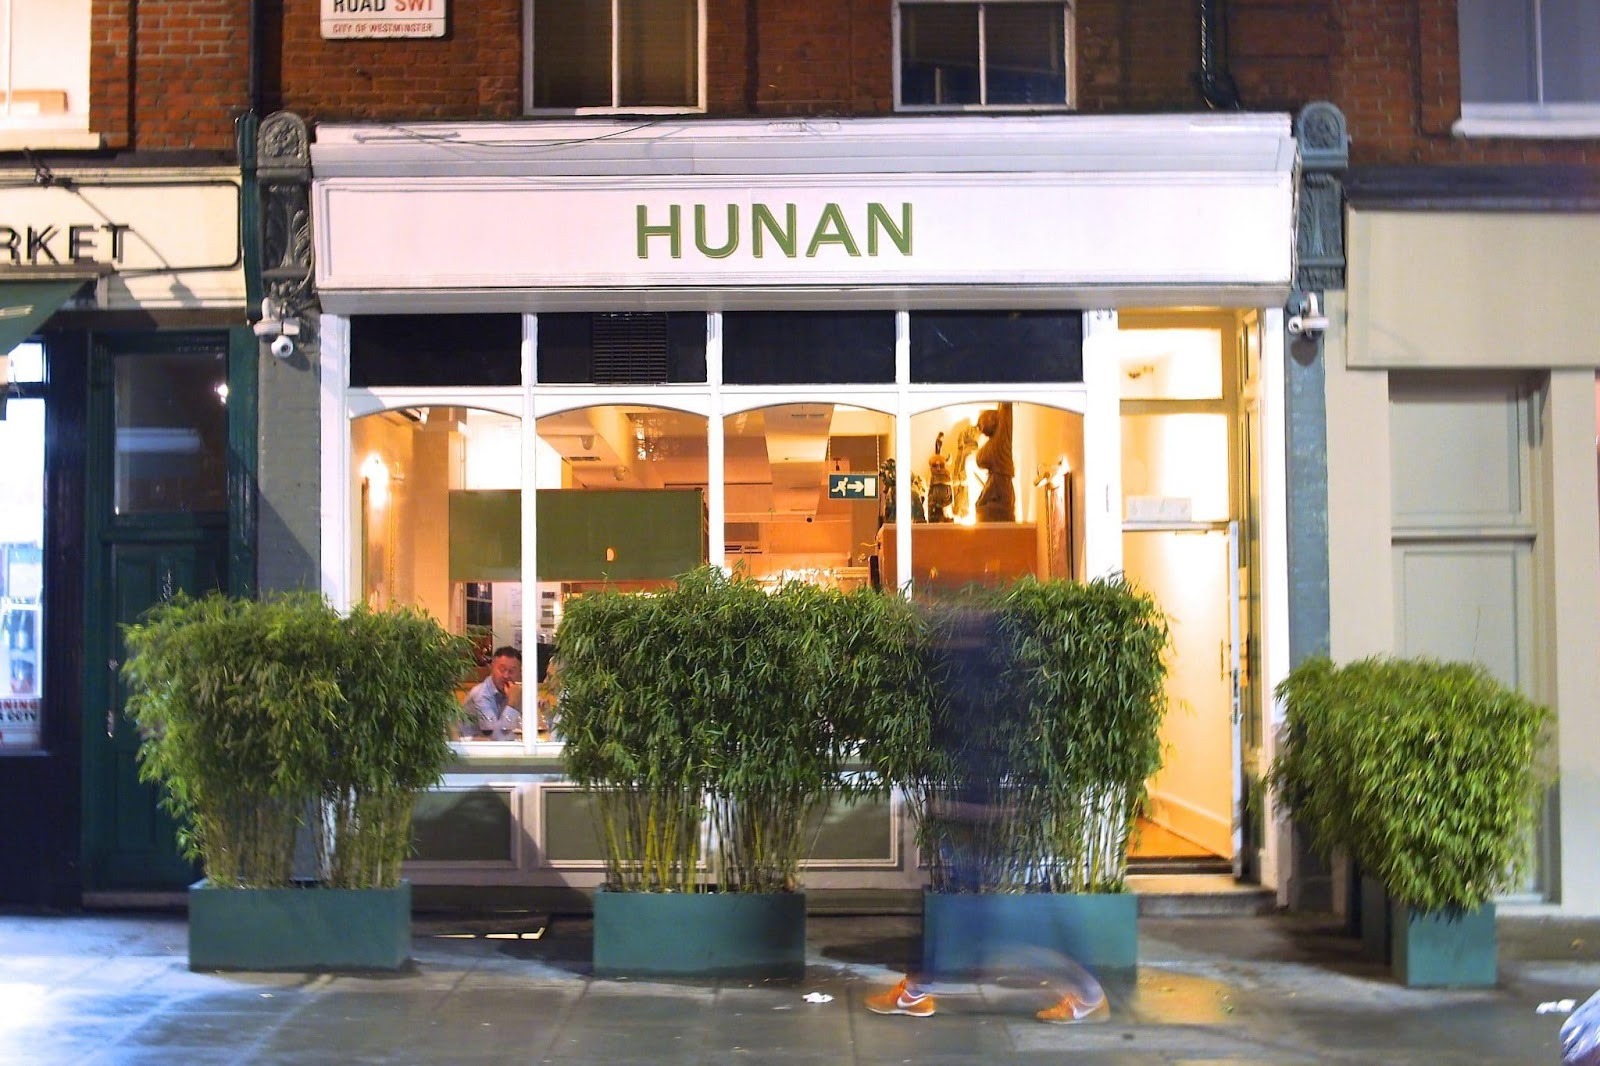 Hunan: London's A+ Chinese Restaurant With No Menu (But Amazing Food)